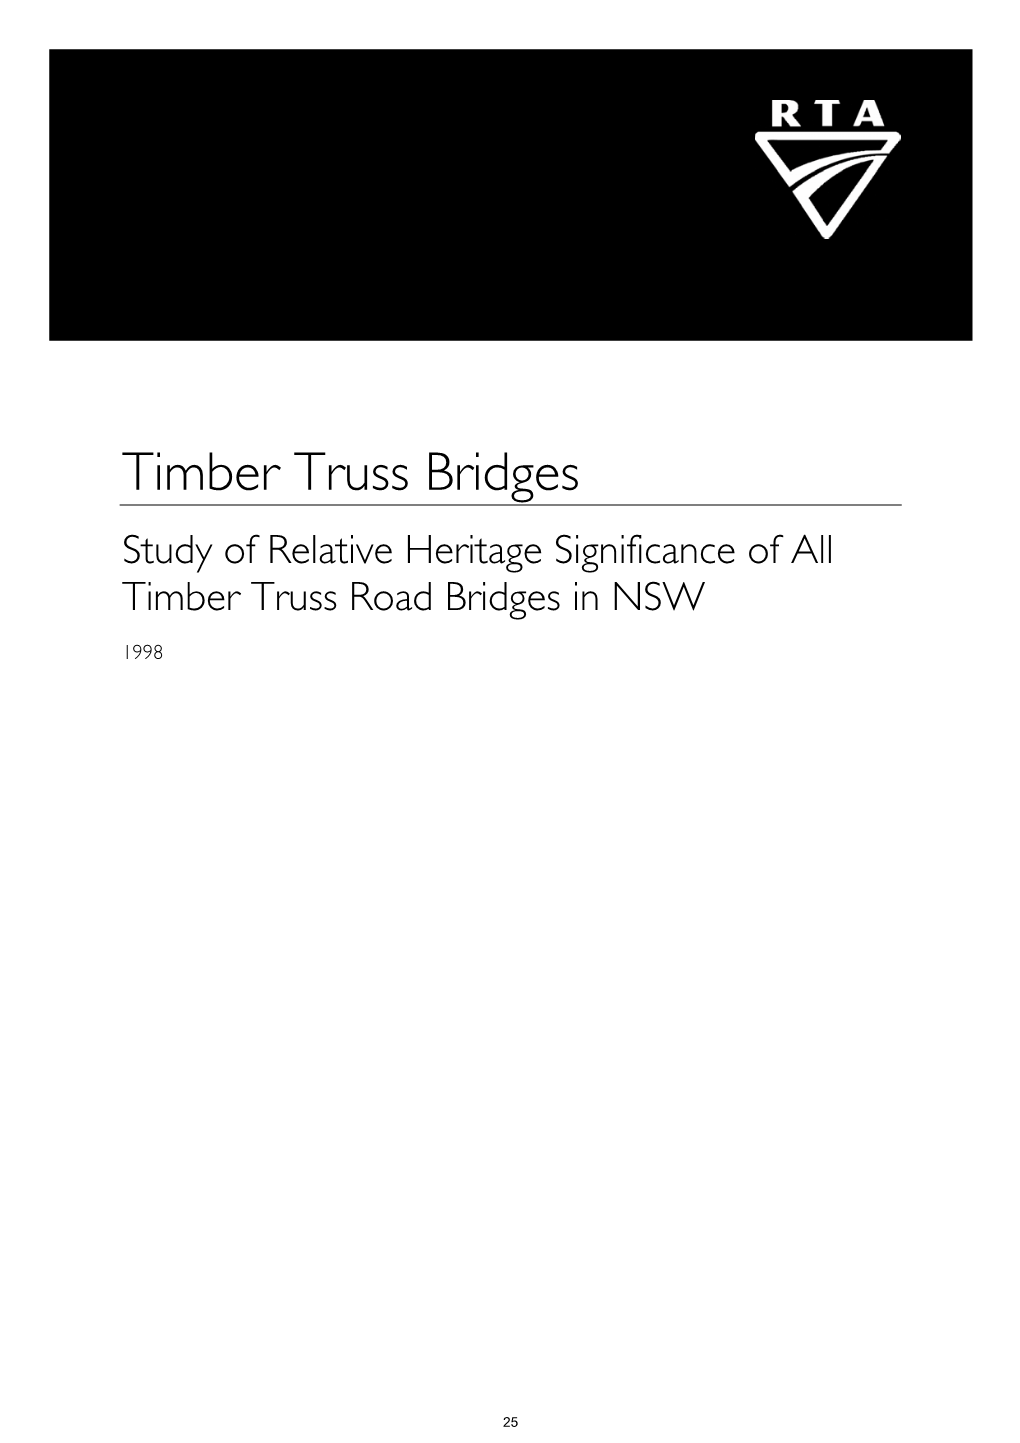 Bridge Types in NSW Historical Overviews 2006